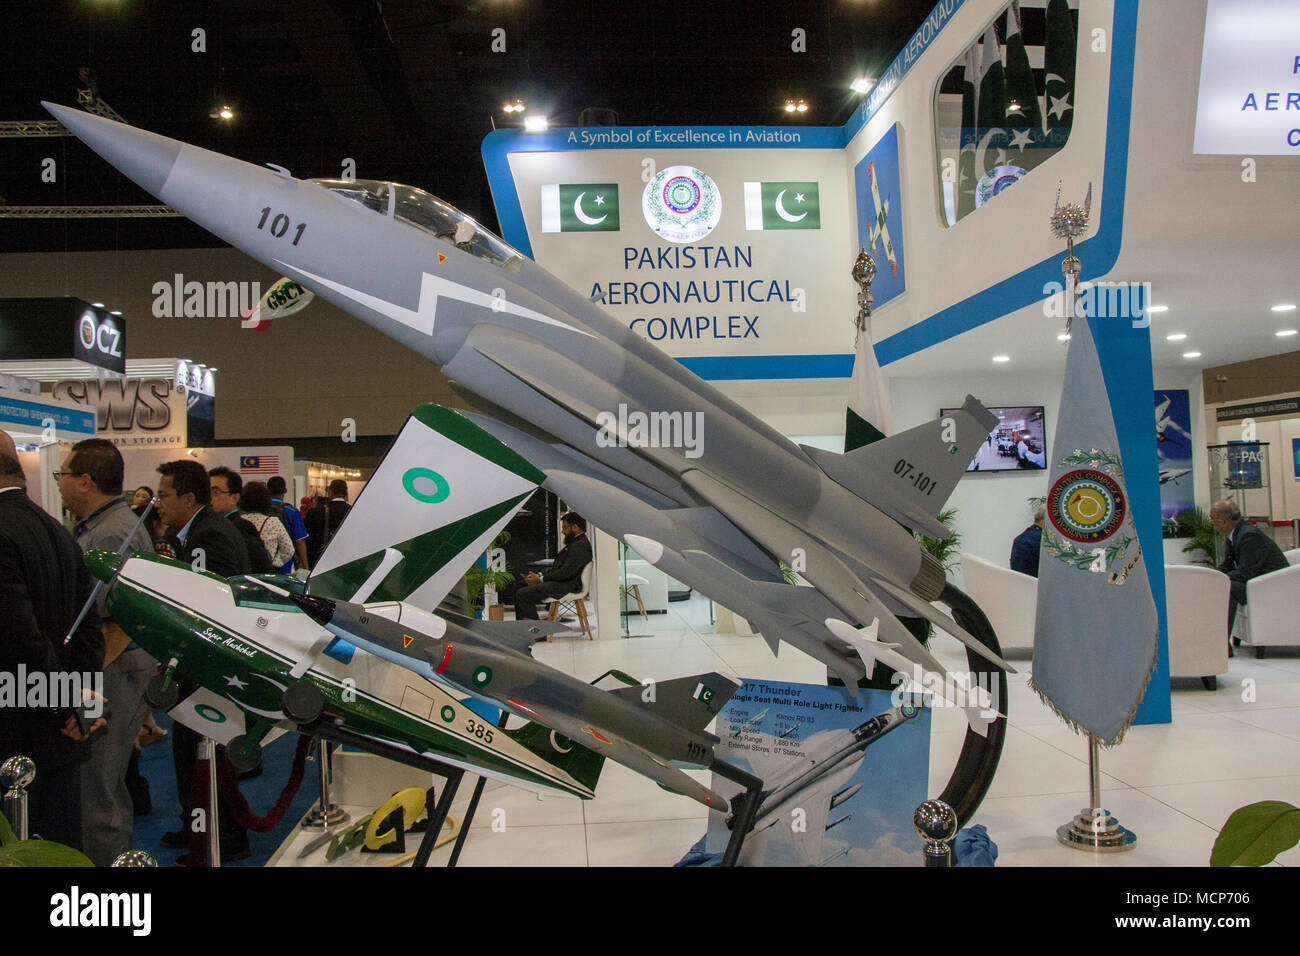 Pakistan Aeronautical Complex booth seen at the DSA 2018.   The 16th Defense Service Asia Exhibition and Conference also known as DSA 2018 was held in Kuala Lumpur, Malaysia on 16th-19th April 2018. It’s one of the top 5 defense shows in the world. Admission is open to government defense & security personnel, defense & security industry professionals & executives and other specially invited guests only.  1,500 companies from 60 nations and more than 50,000 trade visitors from around the world participated in the exhibition. Defense Service Asia has successfully run for almost 3 decades since 1 Stock Photo